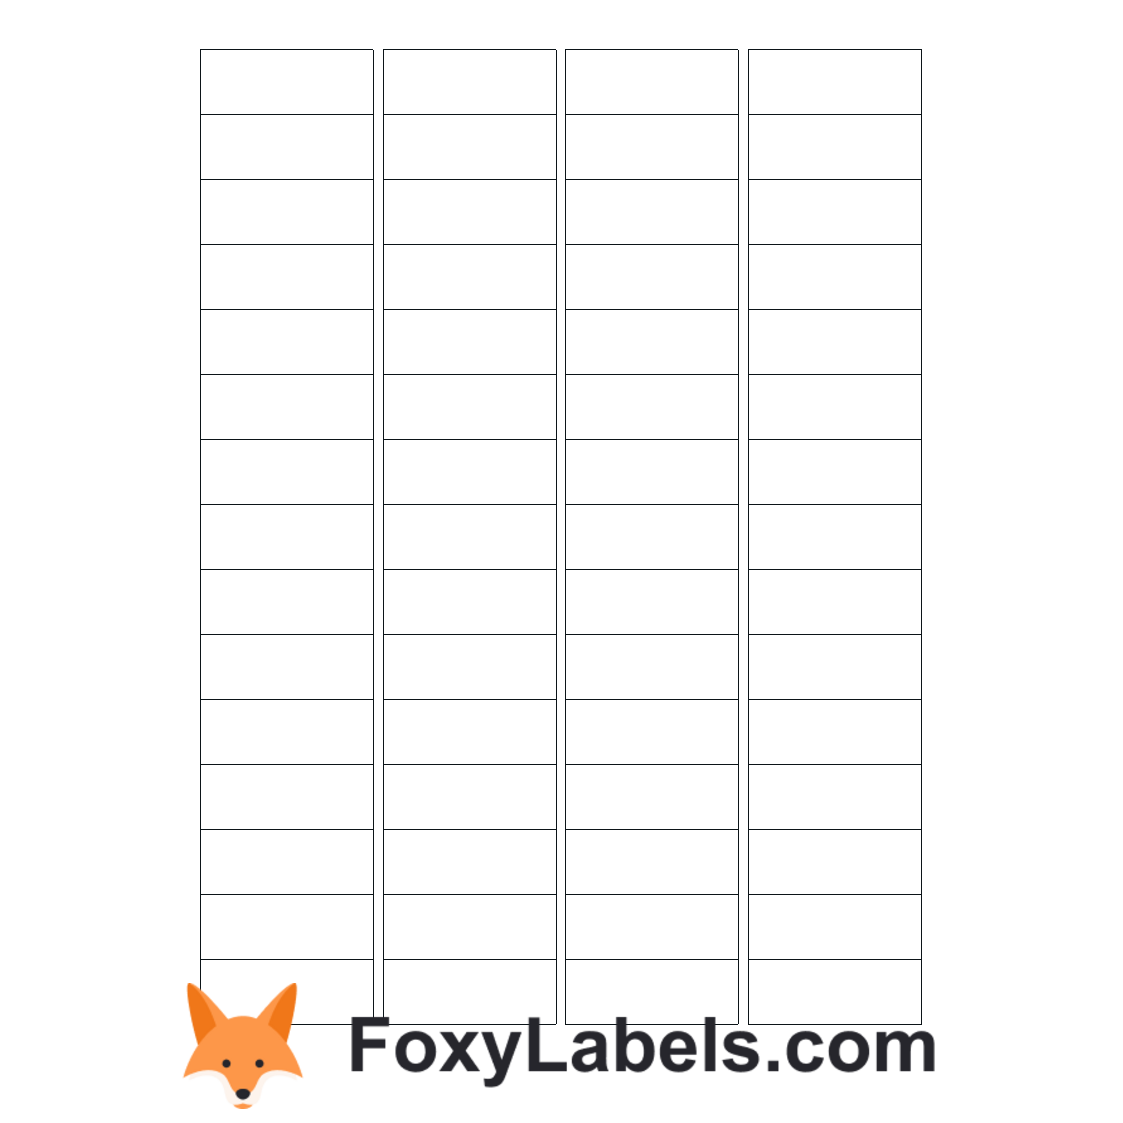 Avery-Zweckform L6021 label template for Google Docs